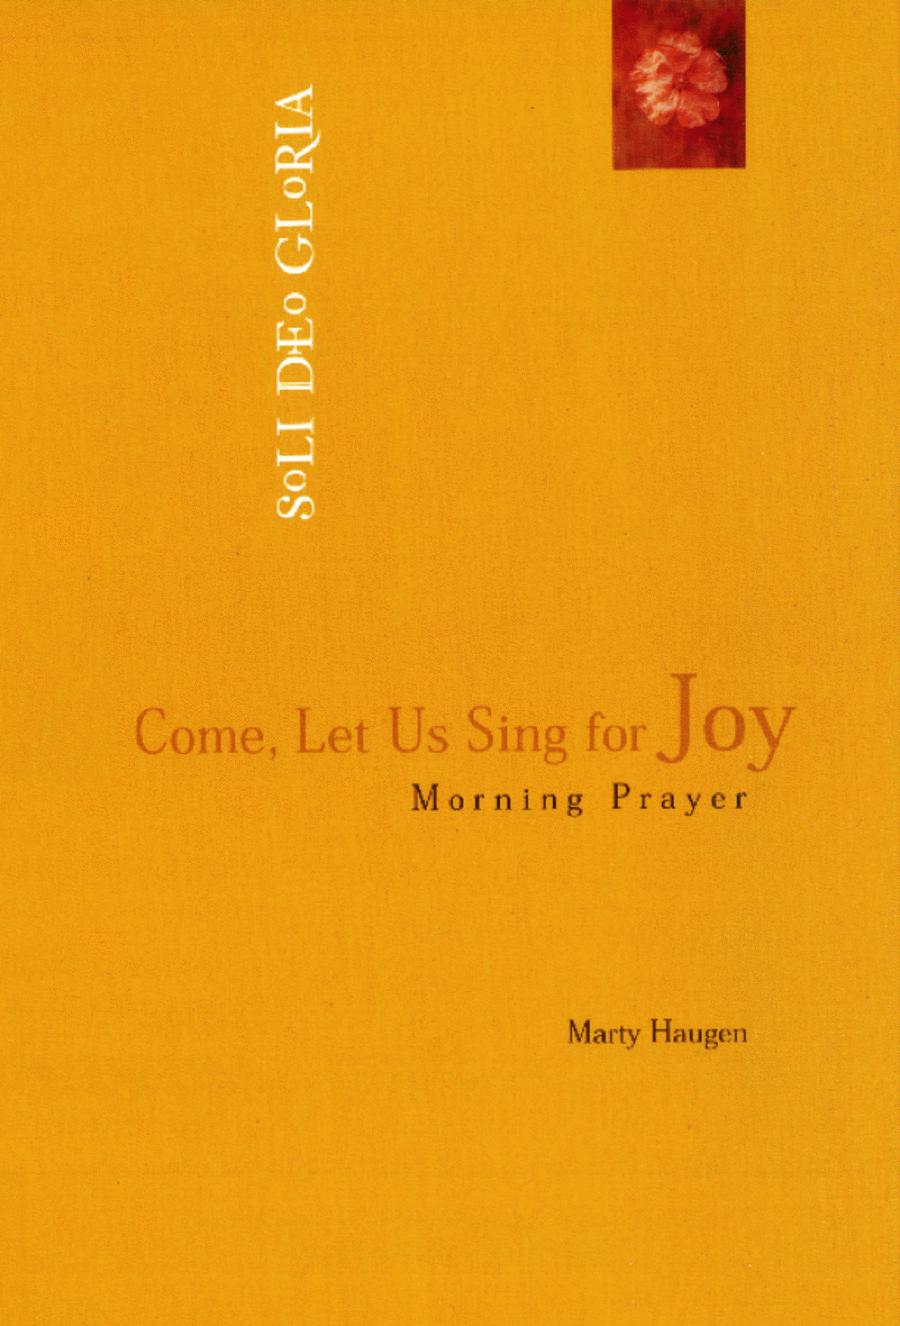 Come, Let Us Sing for Joy